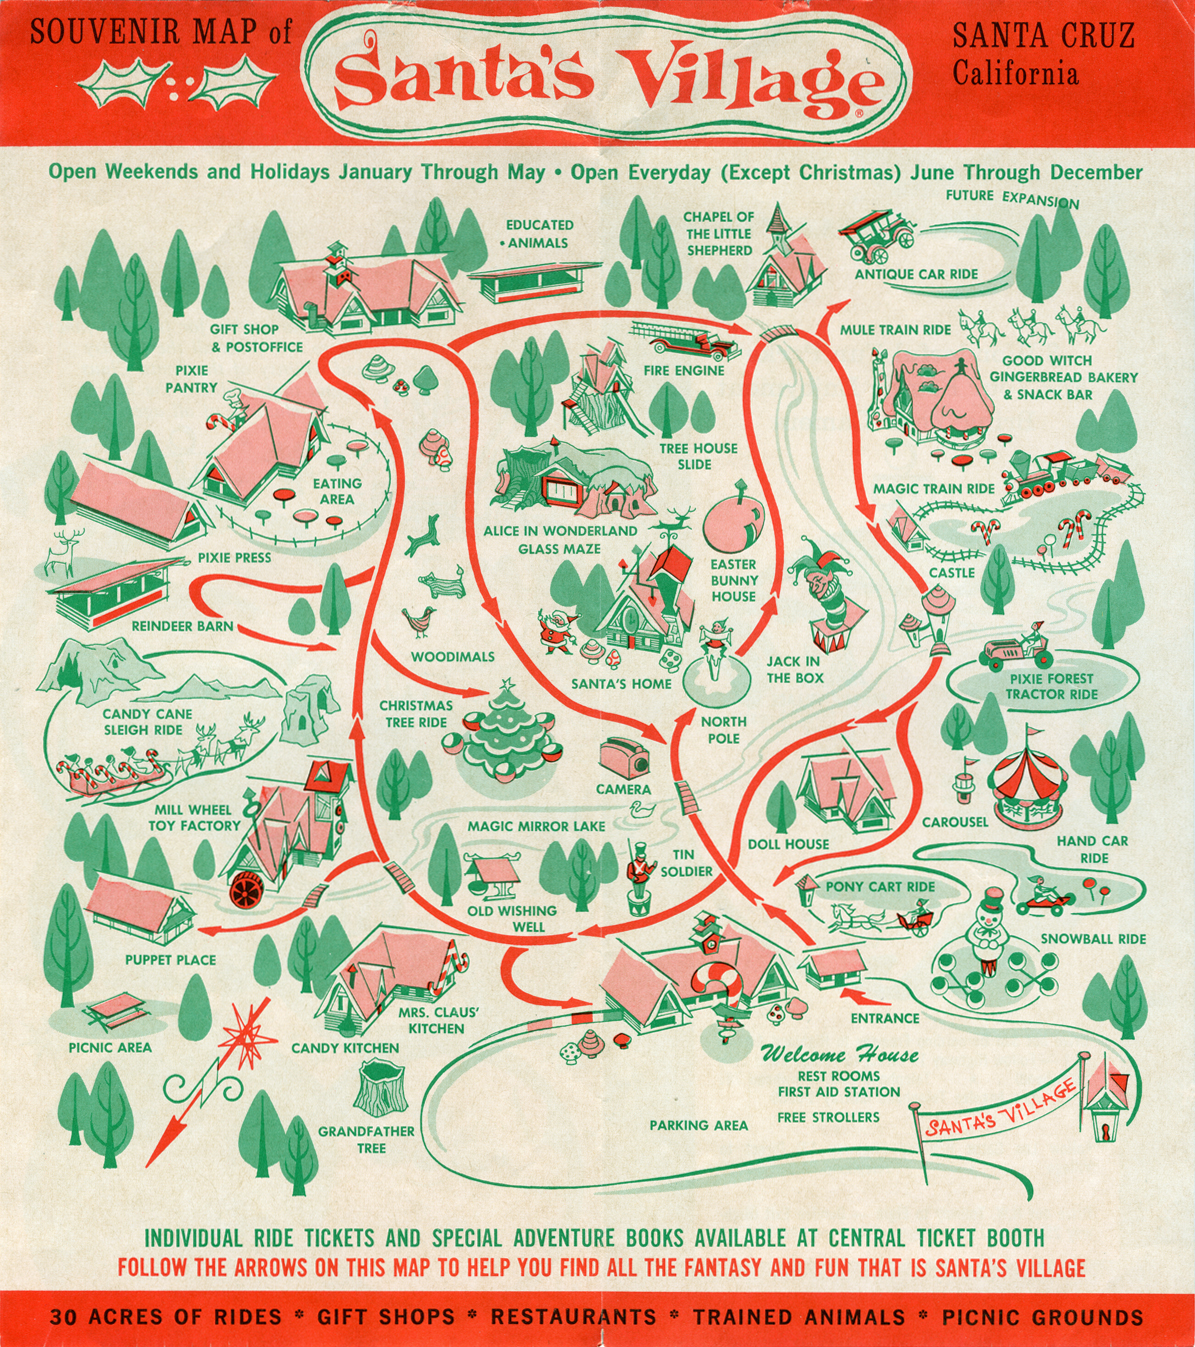  A brochure for Santa’s Village, the theme park that used to stand on the site of the RV park where a man calling himself Robert Evans lived with Lisa, the girl authorities would later realize was not his daughter. 